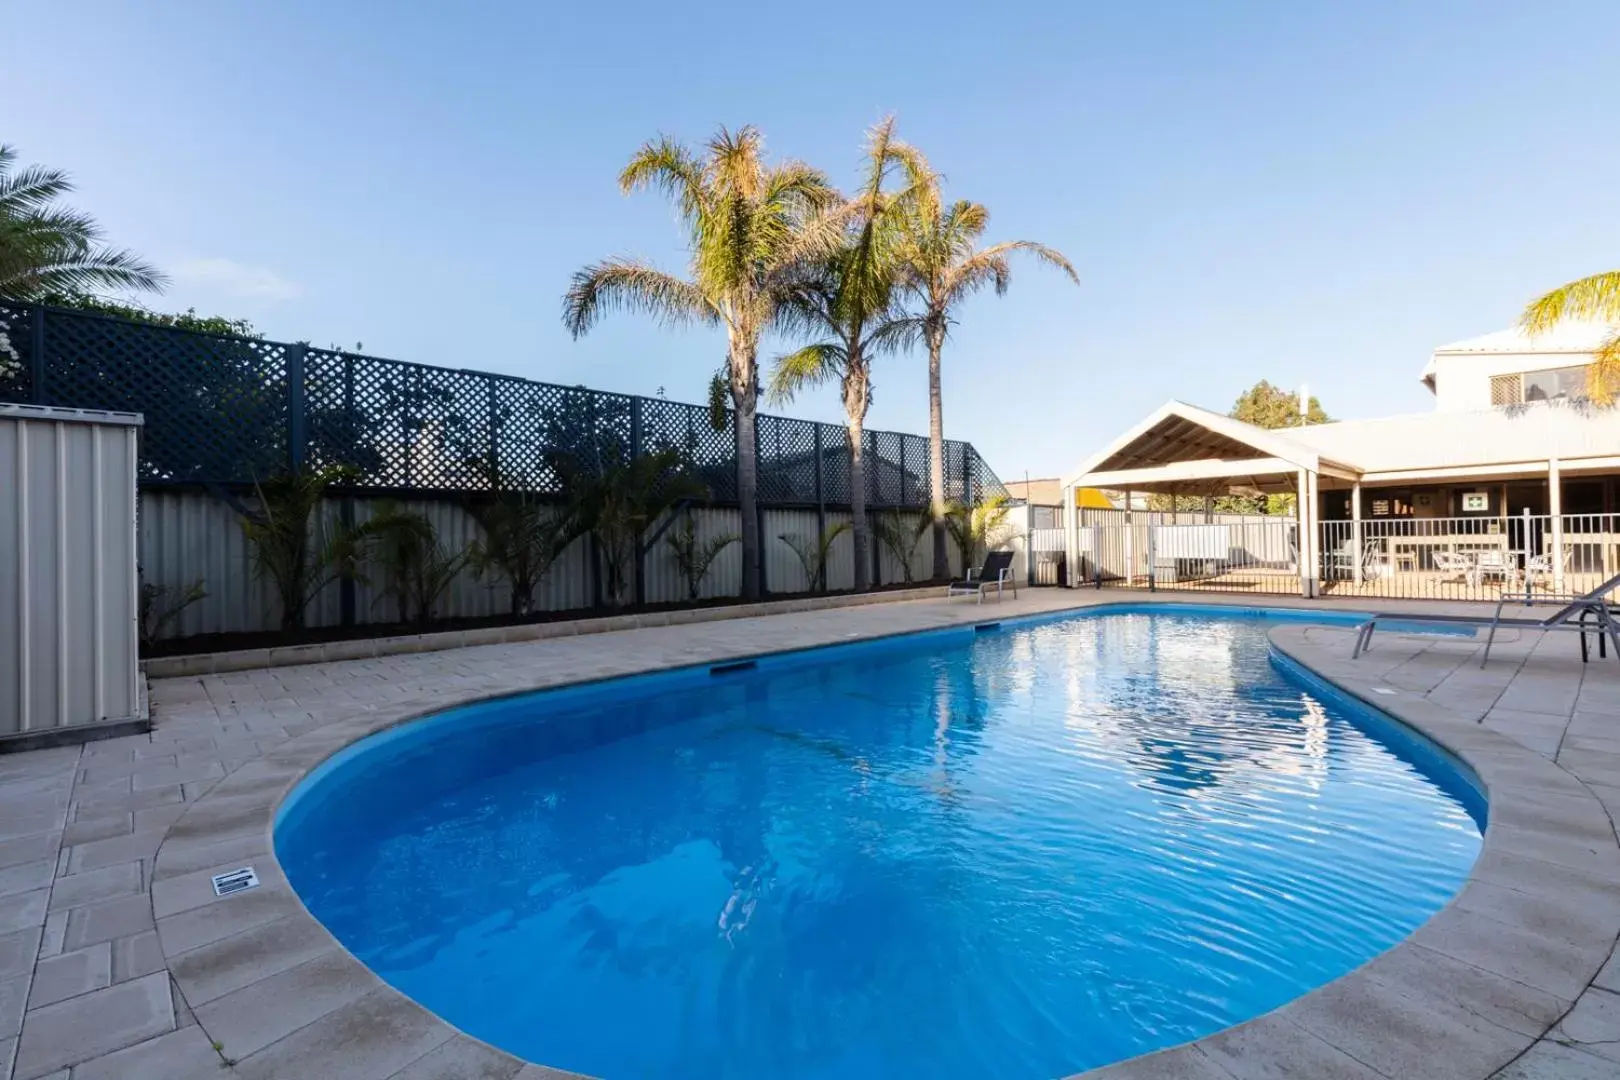 Swimming Pool in Sails Geraldton Accommodation